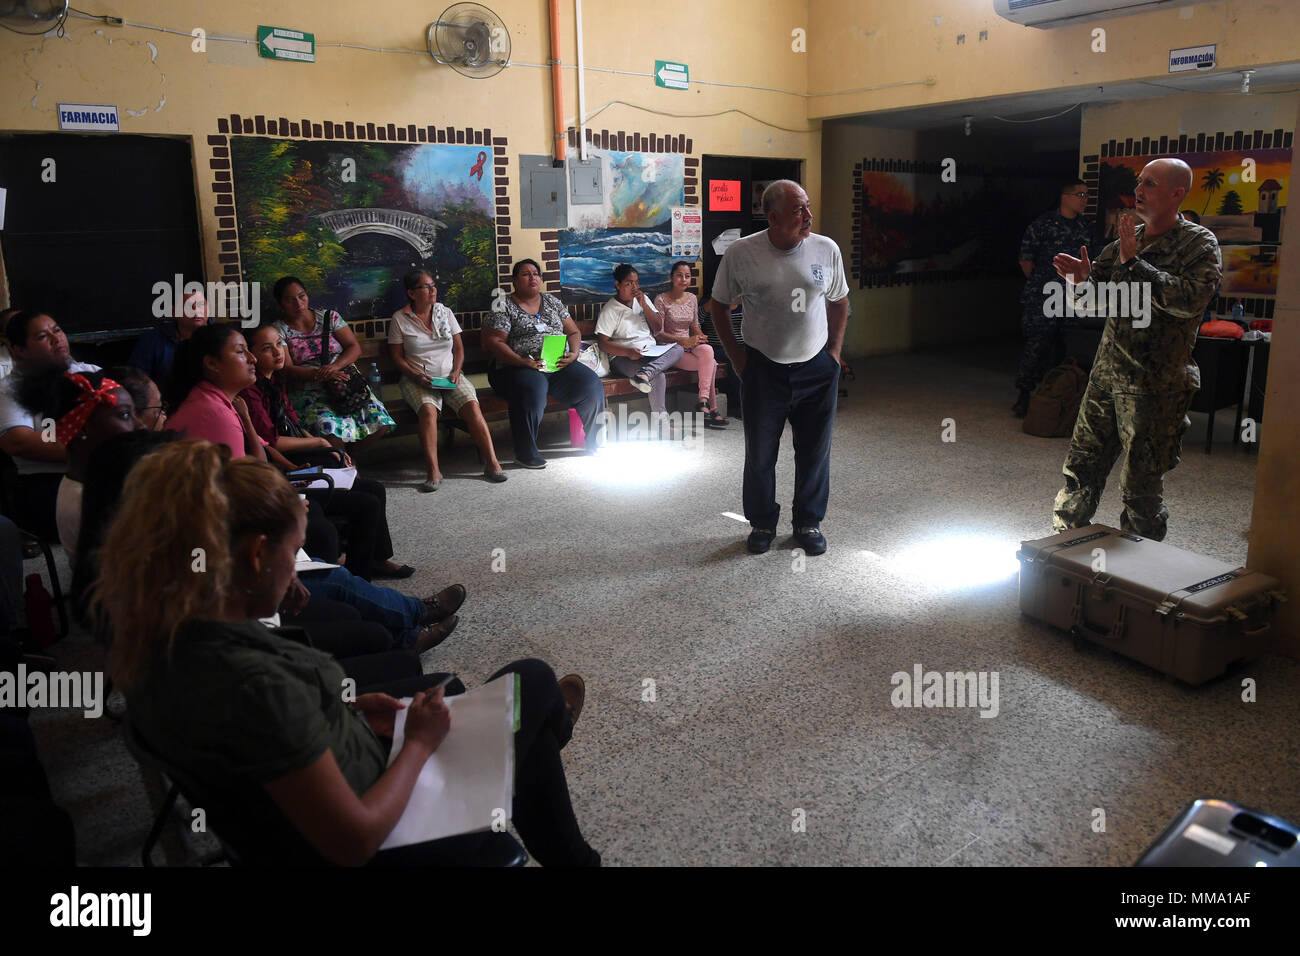 170926-N-BK435-0023 PUERTO BARRIOS, Guatemala (Sept. 26, 2017) Lt. Cmdr. Ian Sutherland, technical director for the Navy Entomology Center of Excellence, gives an entomology lecture to Guatemalan medical professionals, during a subject matter exchange at Puerto Barrios Health Clinic, in support of Southern Partnership Station 17. SPS 17 is a U.S. Navy deployment executed by U.S. Naval Forces Southern Command/U.S. 4th Fleet, focused on subject matter expert exchanges with partner nation militaries and security forces in Central and South America. (U.S. Navy photo by Mass Communication Specialis Stock Photo